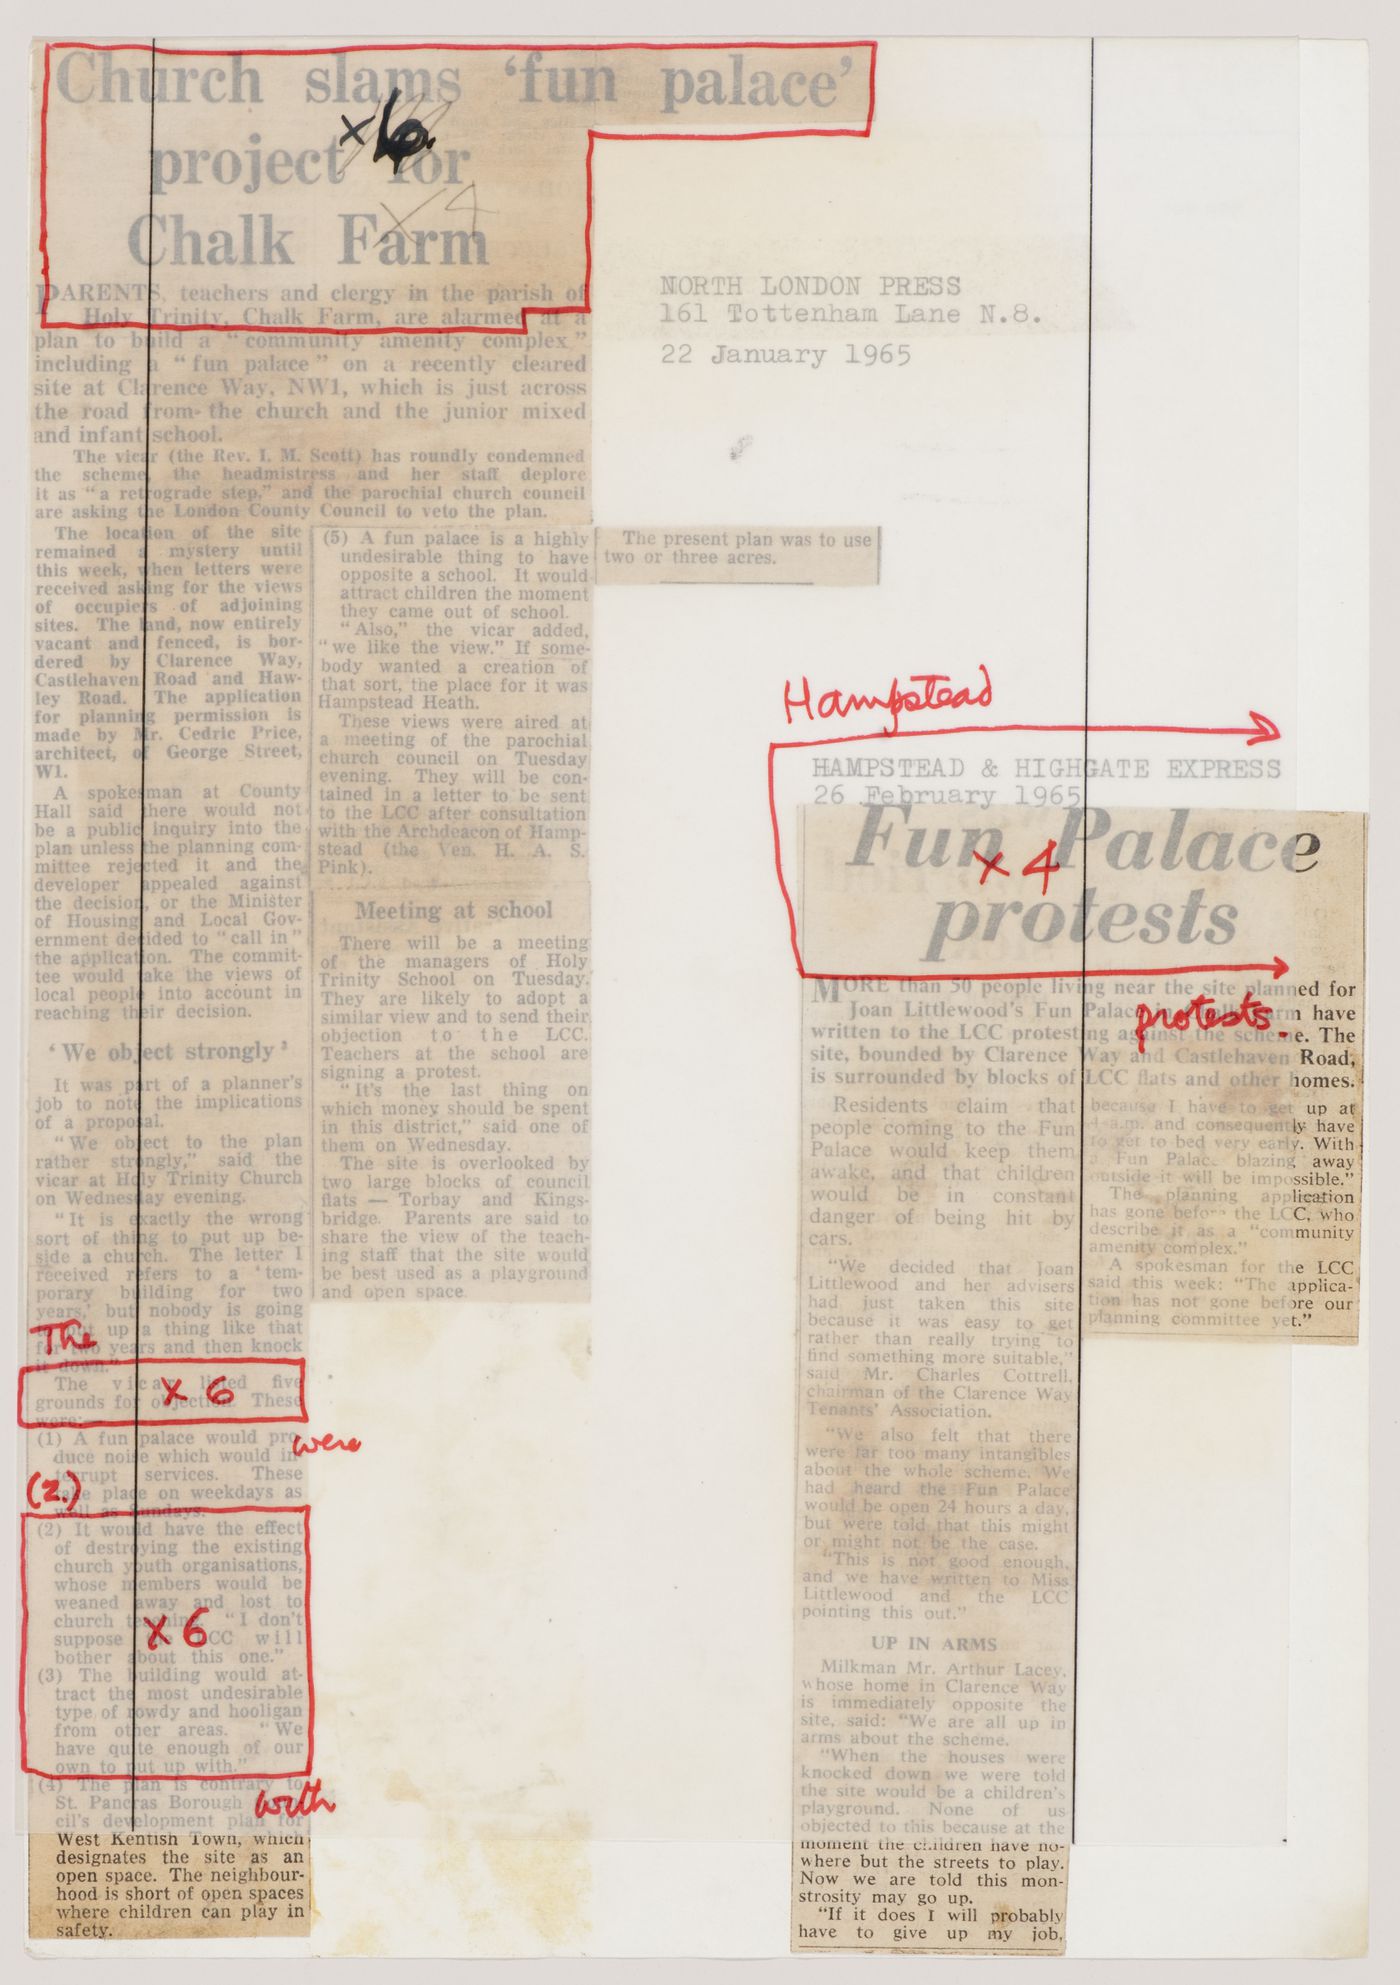 Collage of clippings from the North London Press ("Church slams 'Fun Palace' project for Chalk Farm", 22 January 1965) and the Hampstead & Highgate Express ("Fun Palace protests", 26 February 1965), overlayed with notations